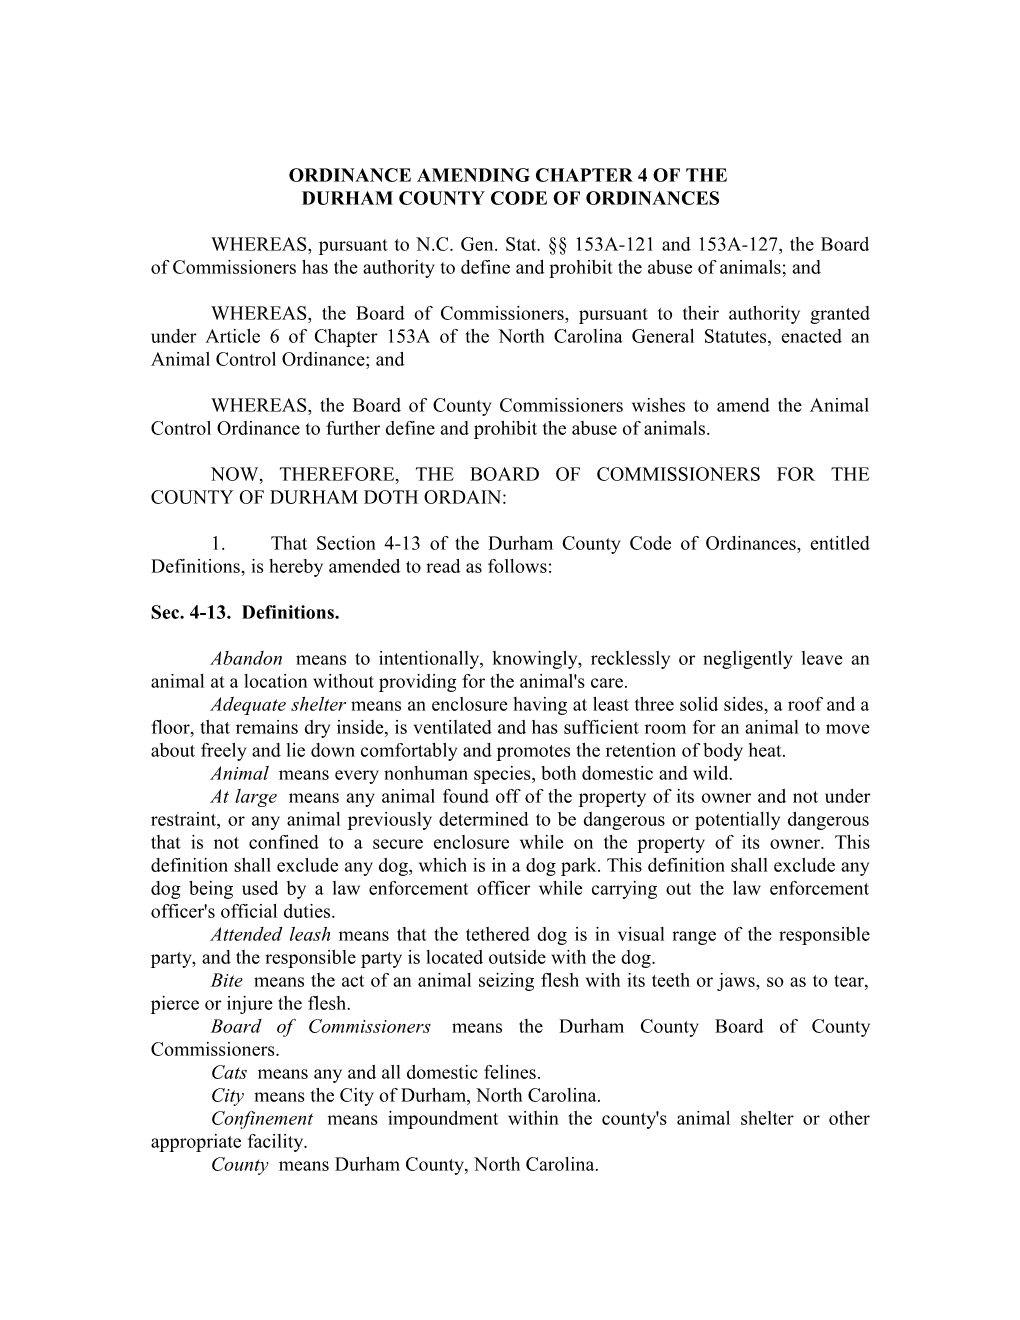 Ordinance Amending Chapter 4 of The